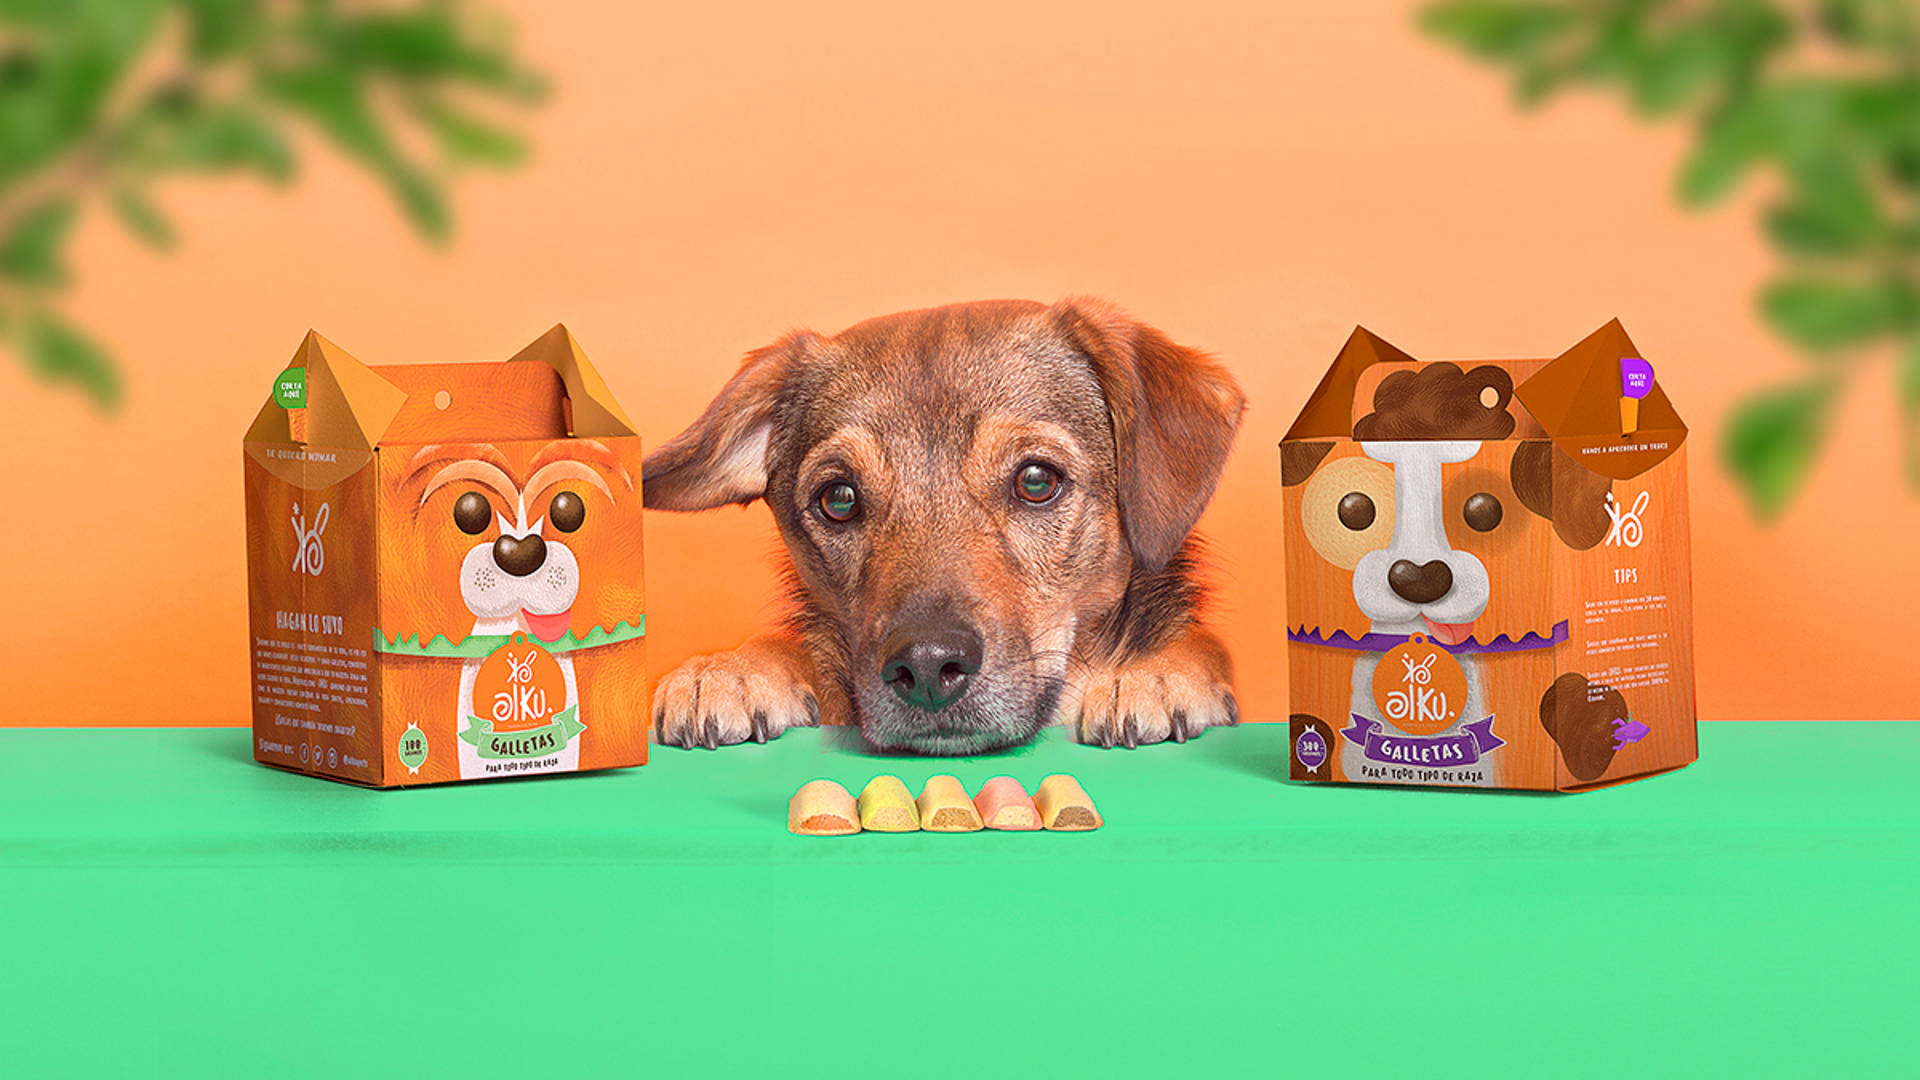 Featured image for This Dog Treat Packaging is Absolutely Adorable